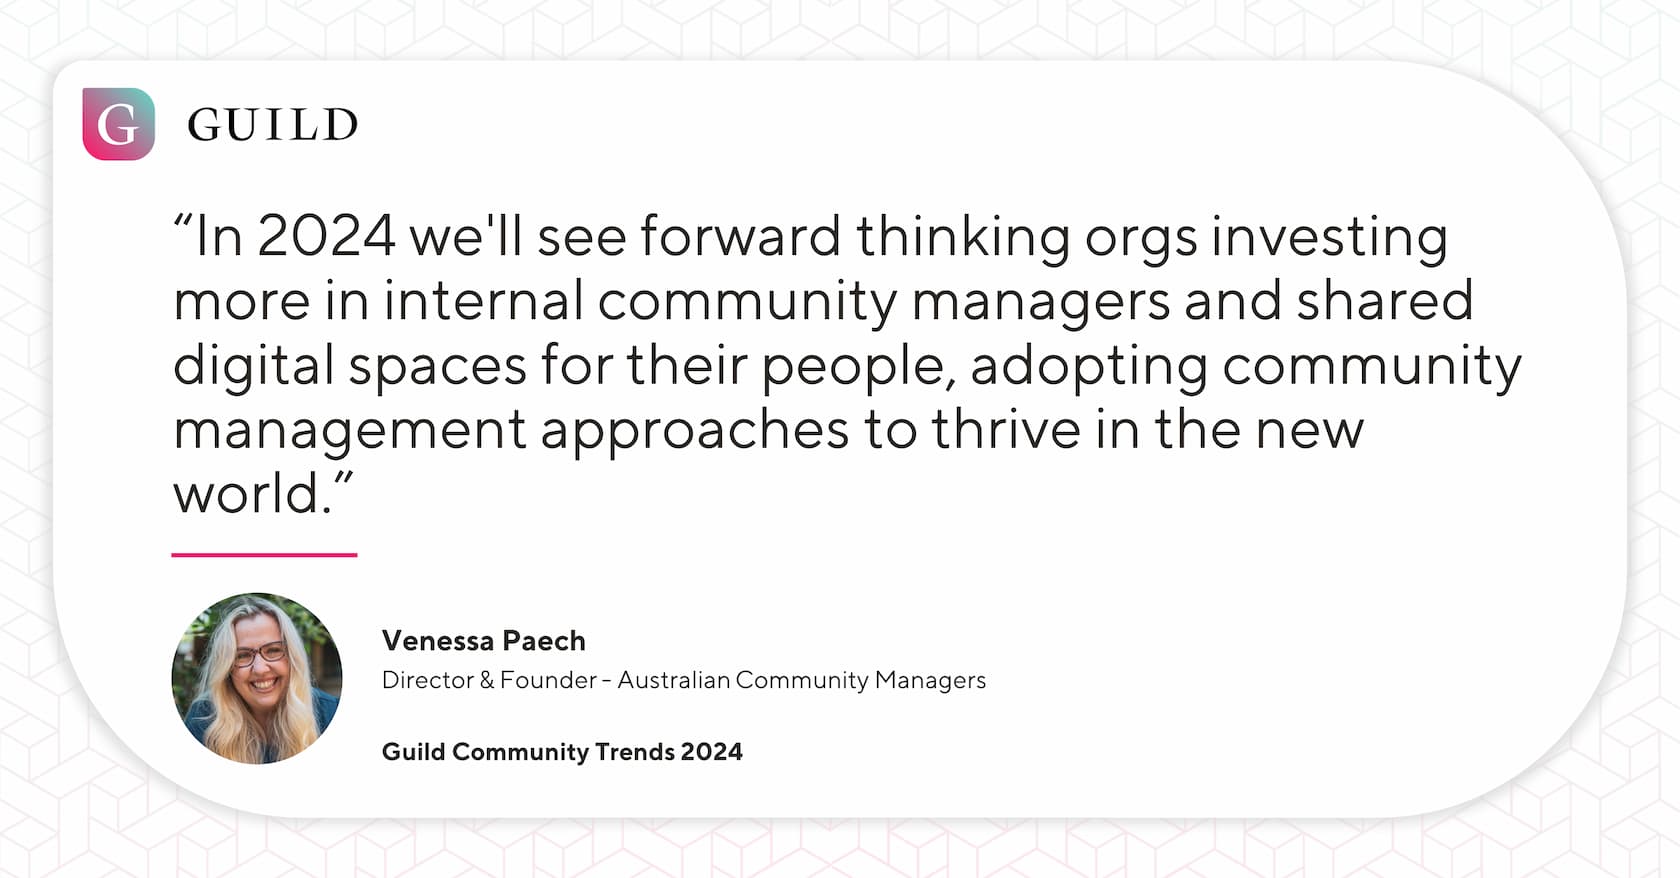 A quote from Venessa Paech reading "“In 2024 we'll see forward thinking orgs investing more in internal community managers and shared digital spaces for their people, adopting community management approaches to thrive in the new world.”"